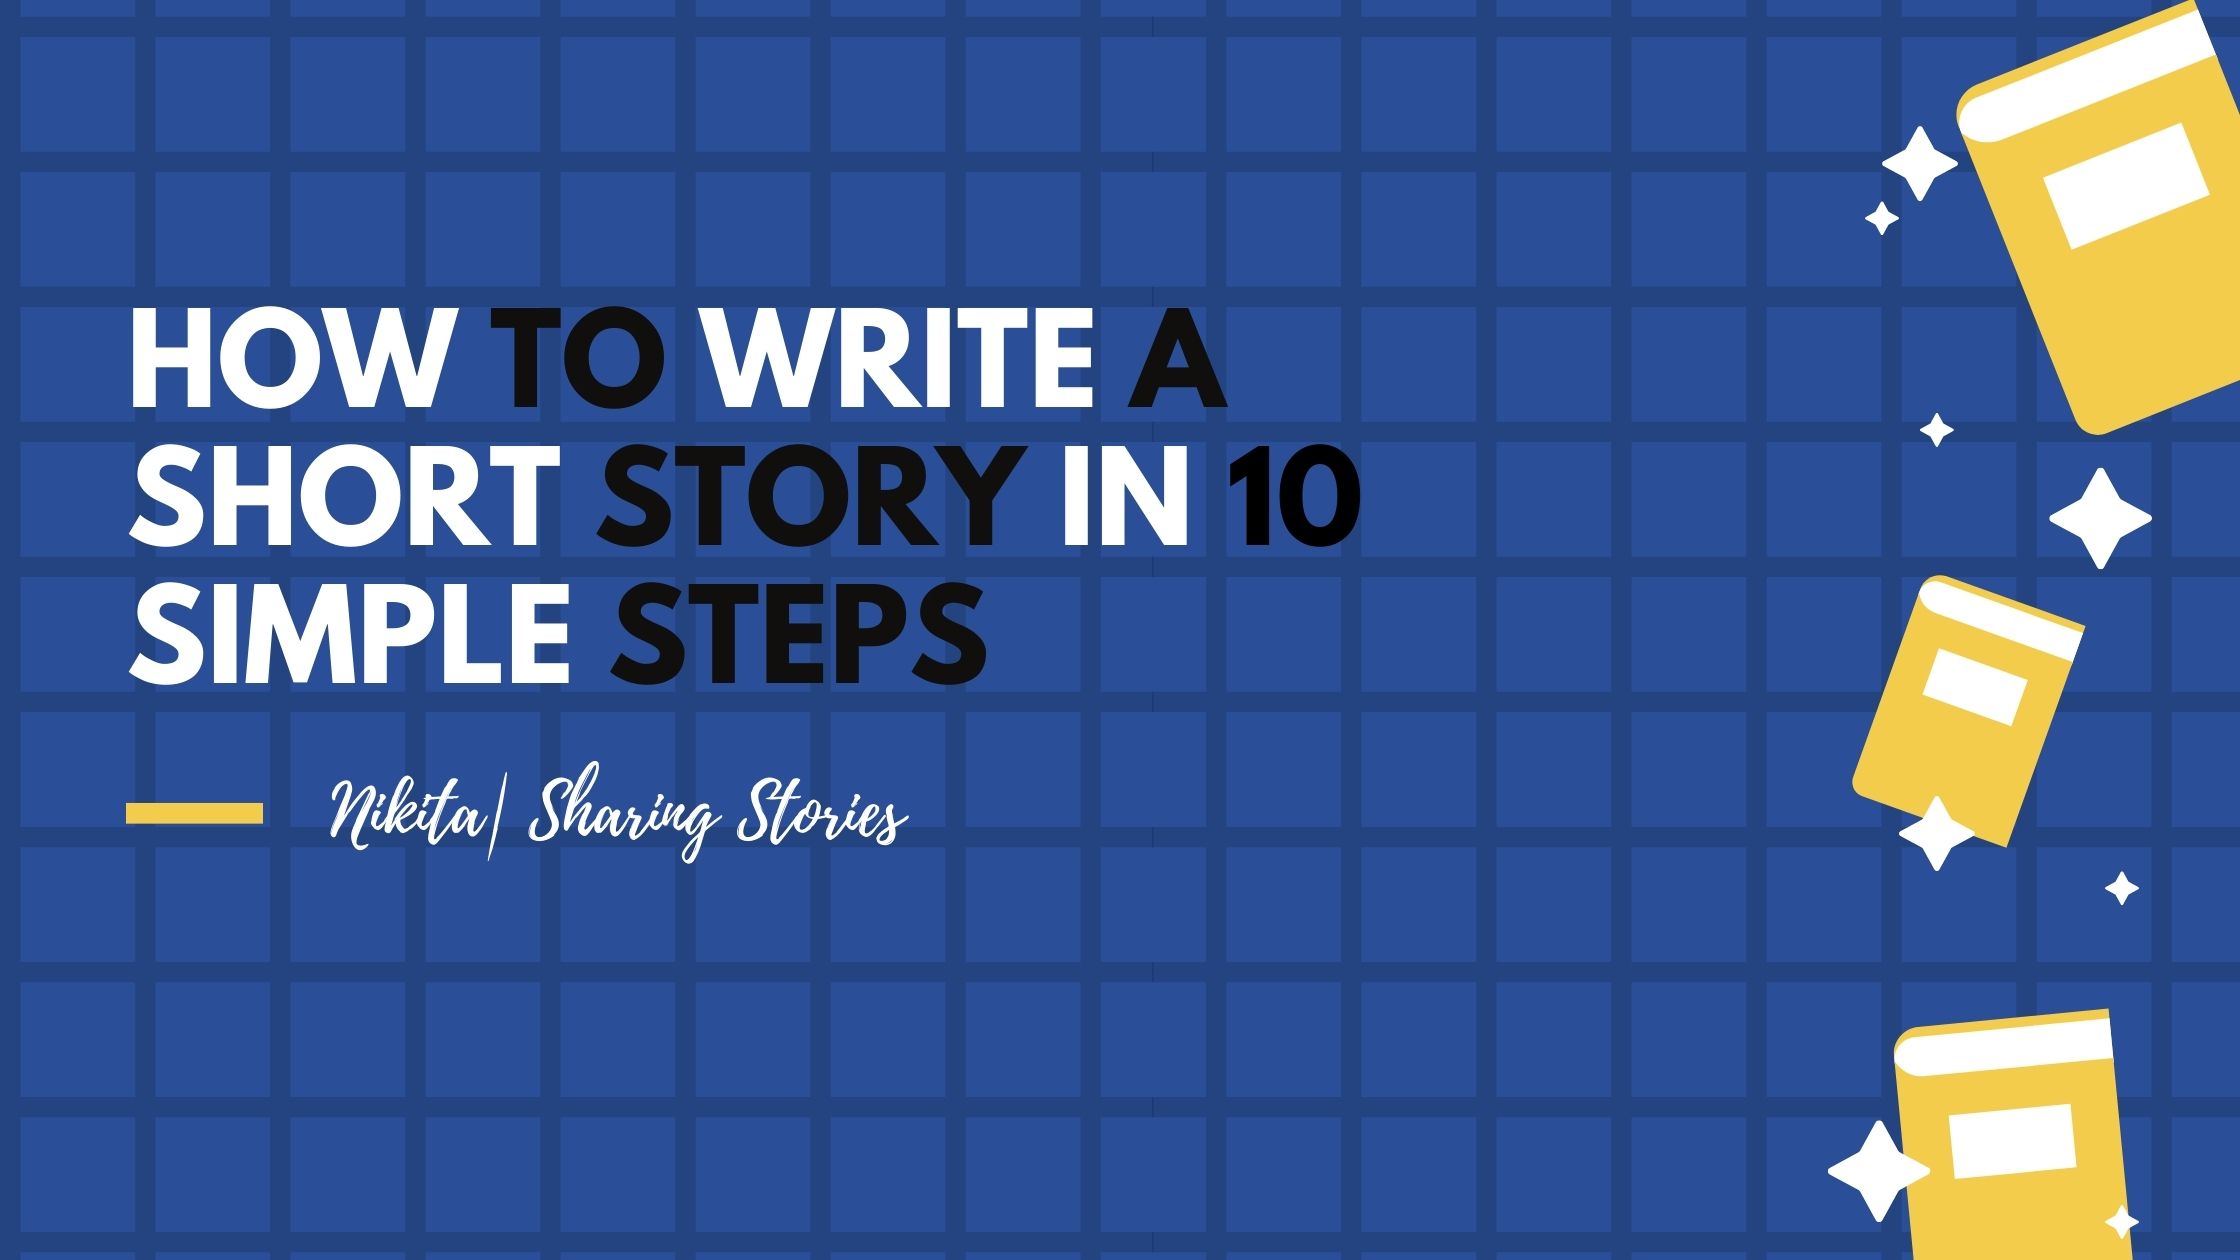 how-to-write-a-short-story-in-10-simple-steps-sharing-stories